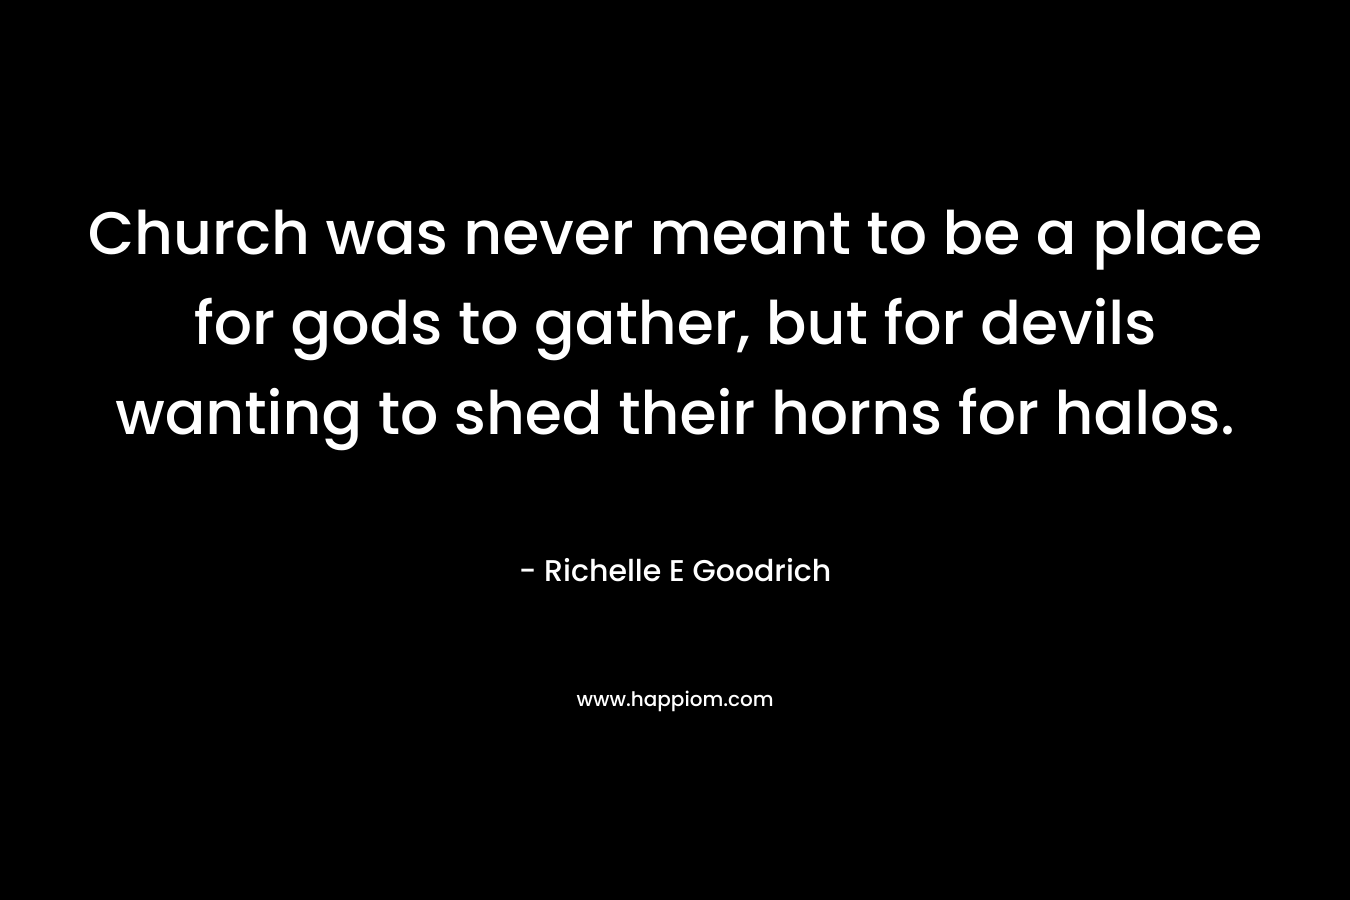 Church was never meant to be a place for gods to gather, but for devils wanting to shed their horns for halos.